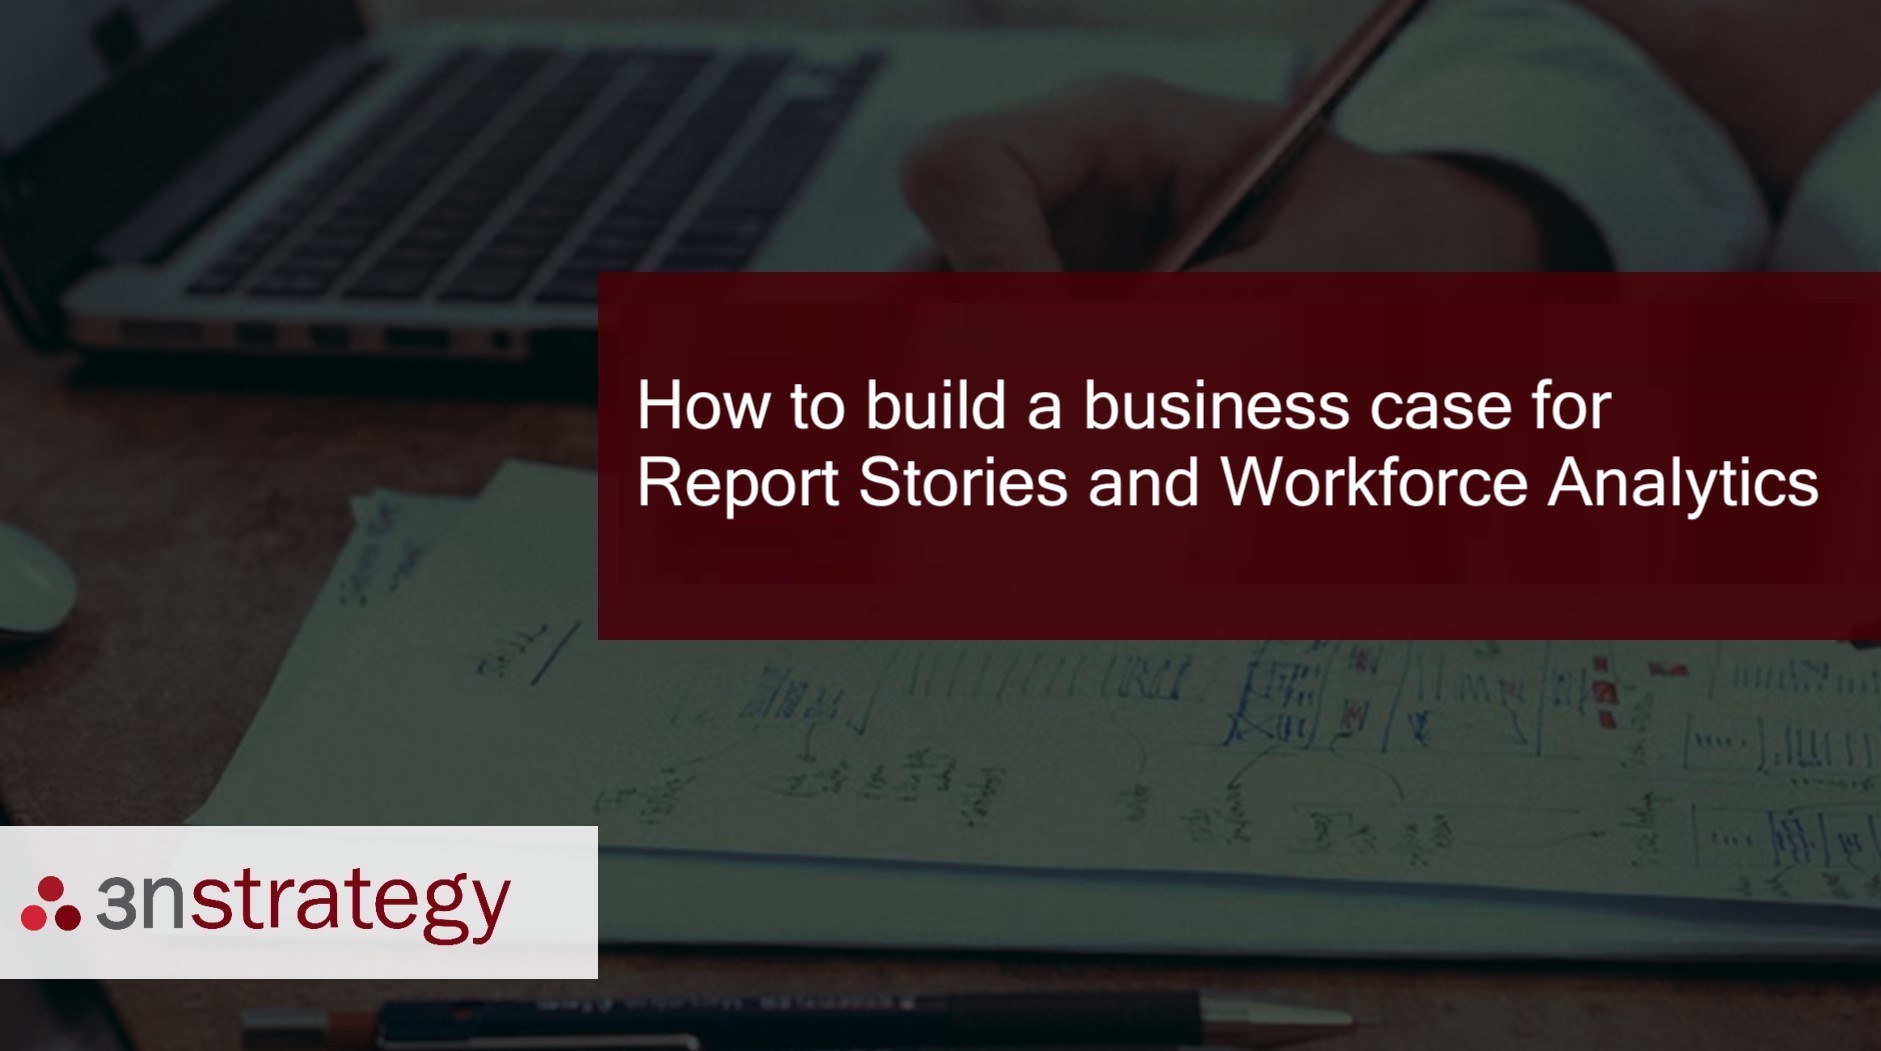 Business case for Report Stories